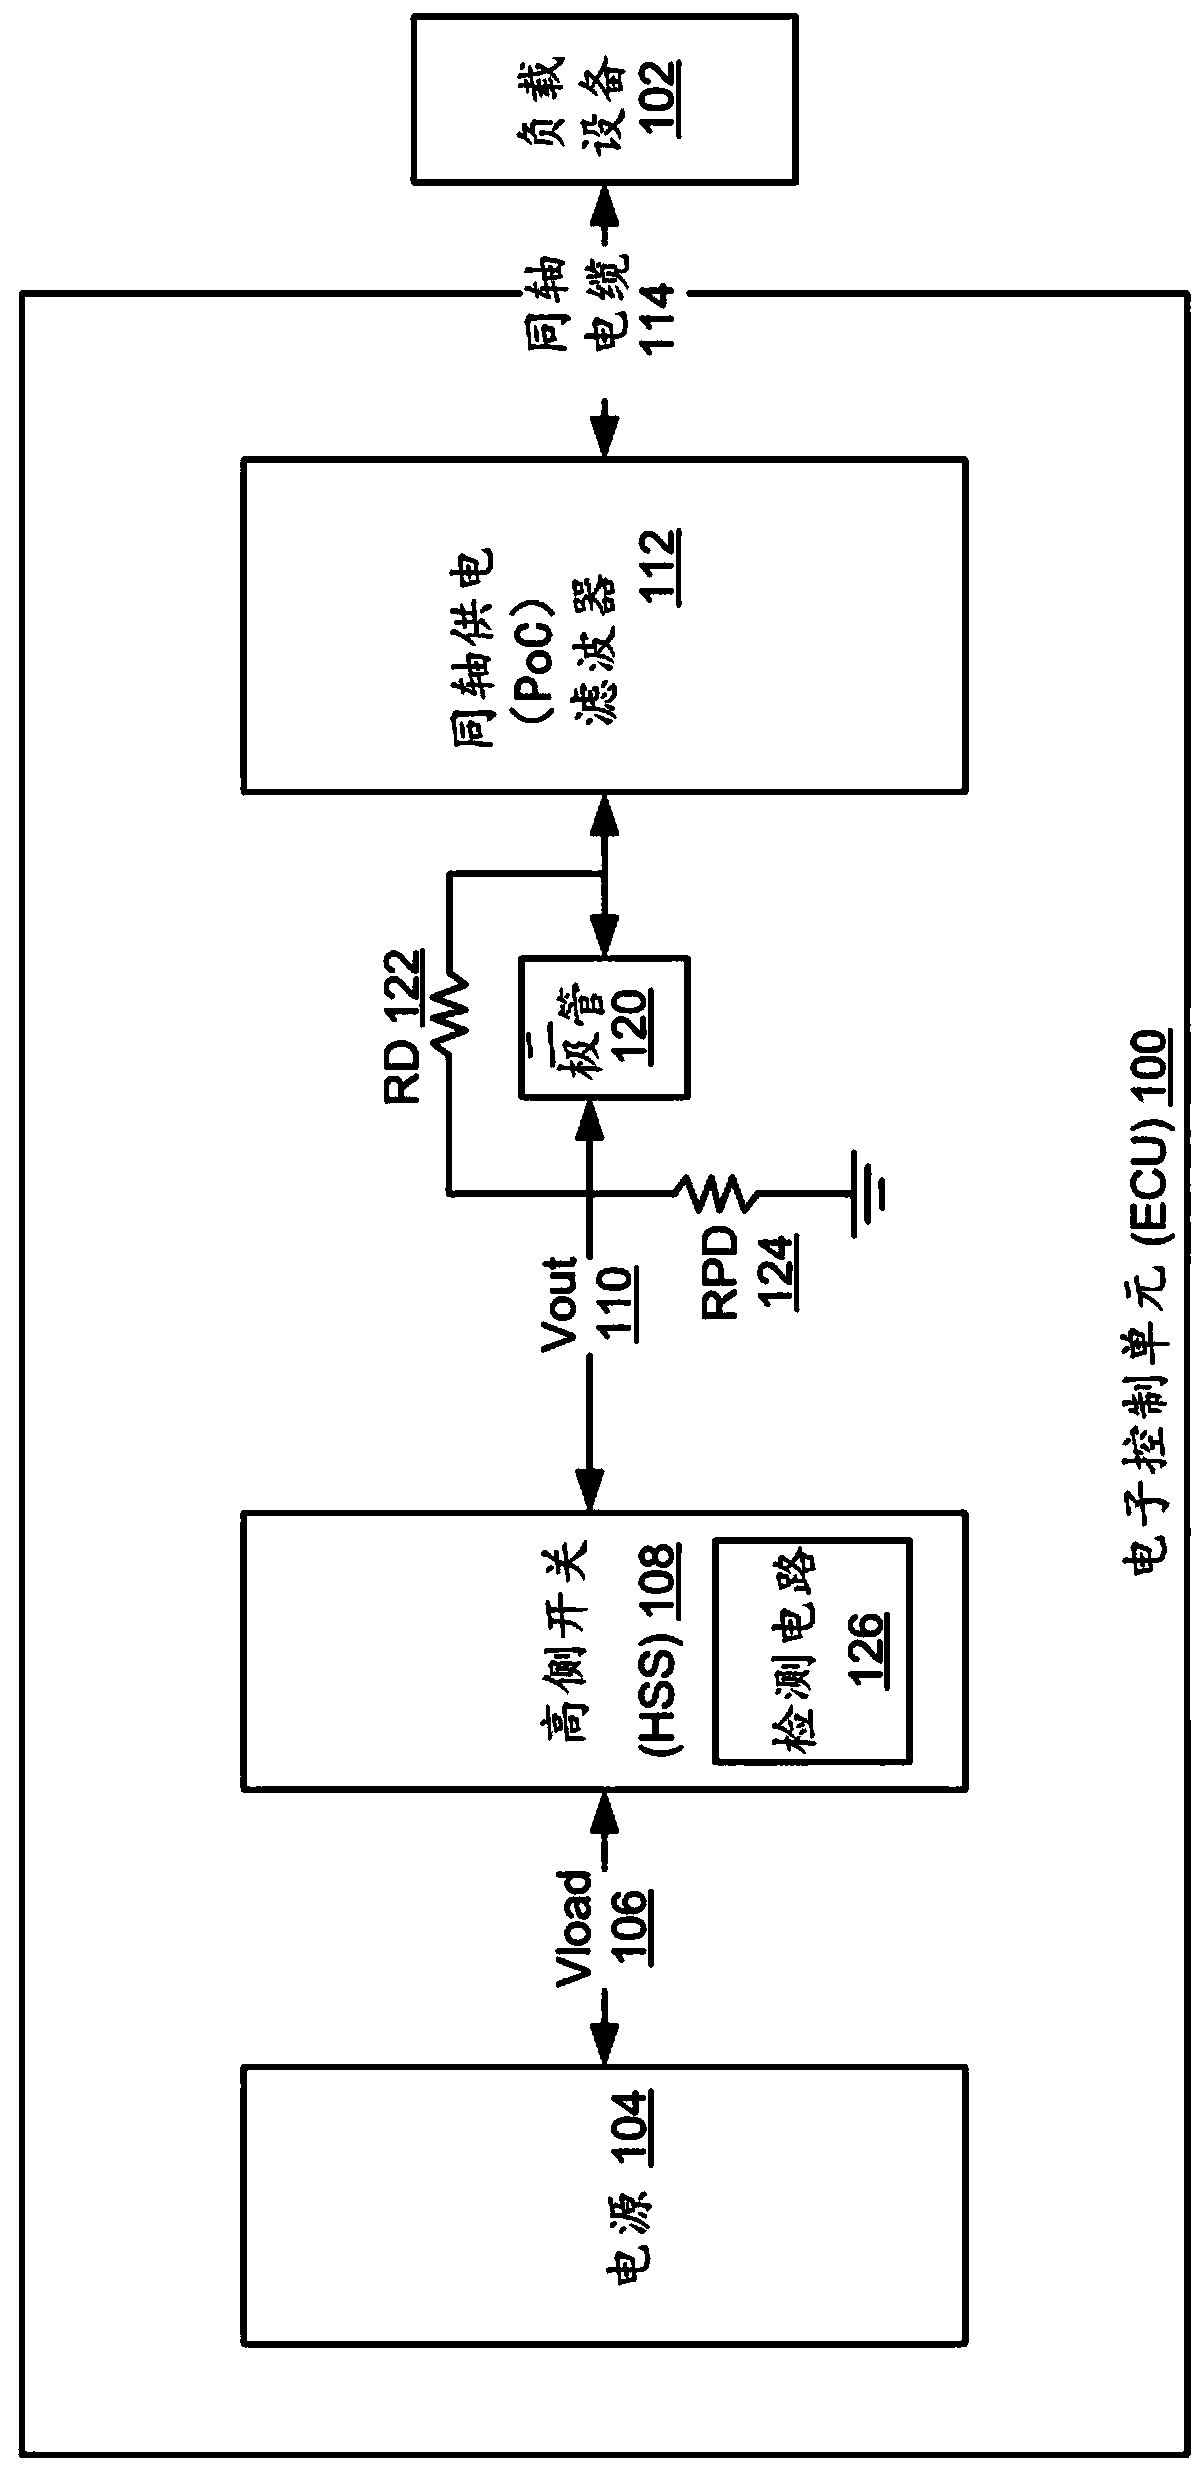 System and method for diagnosing electrical faults